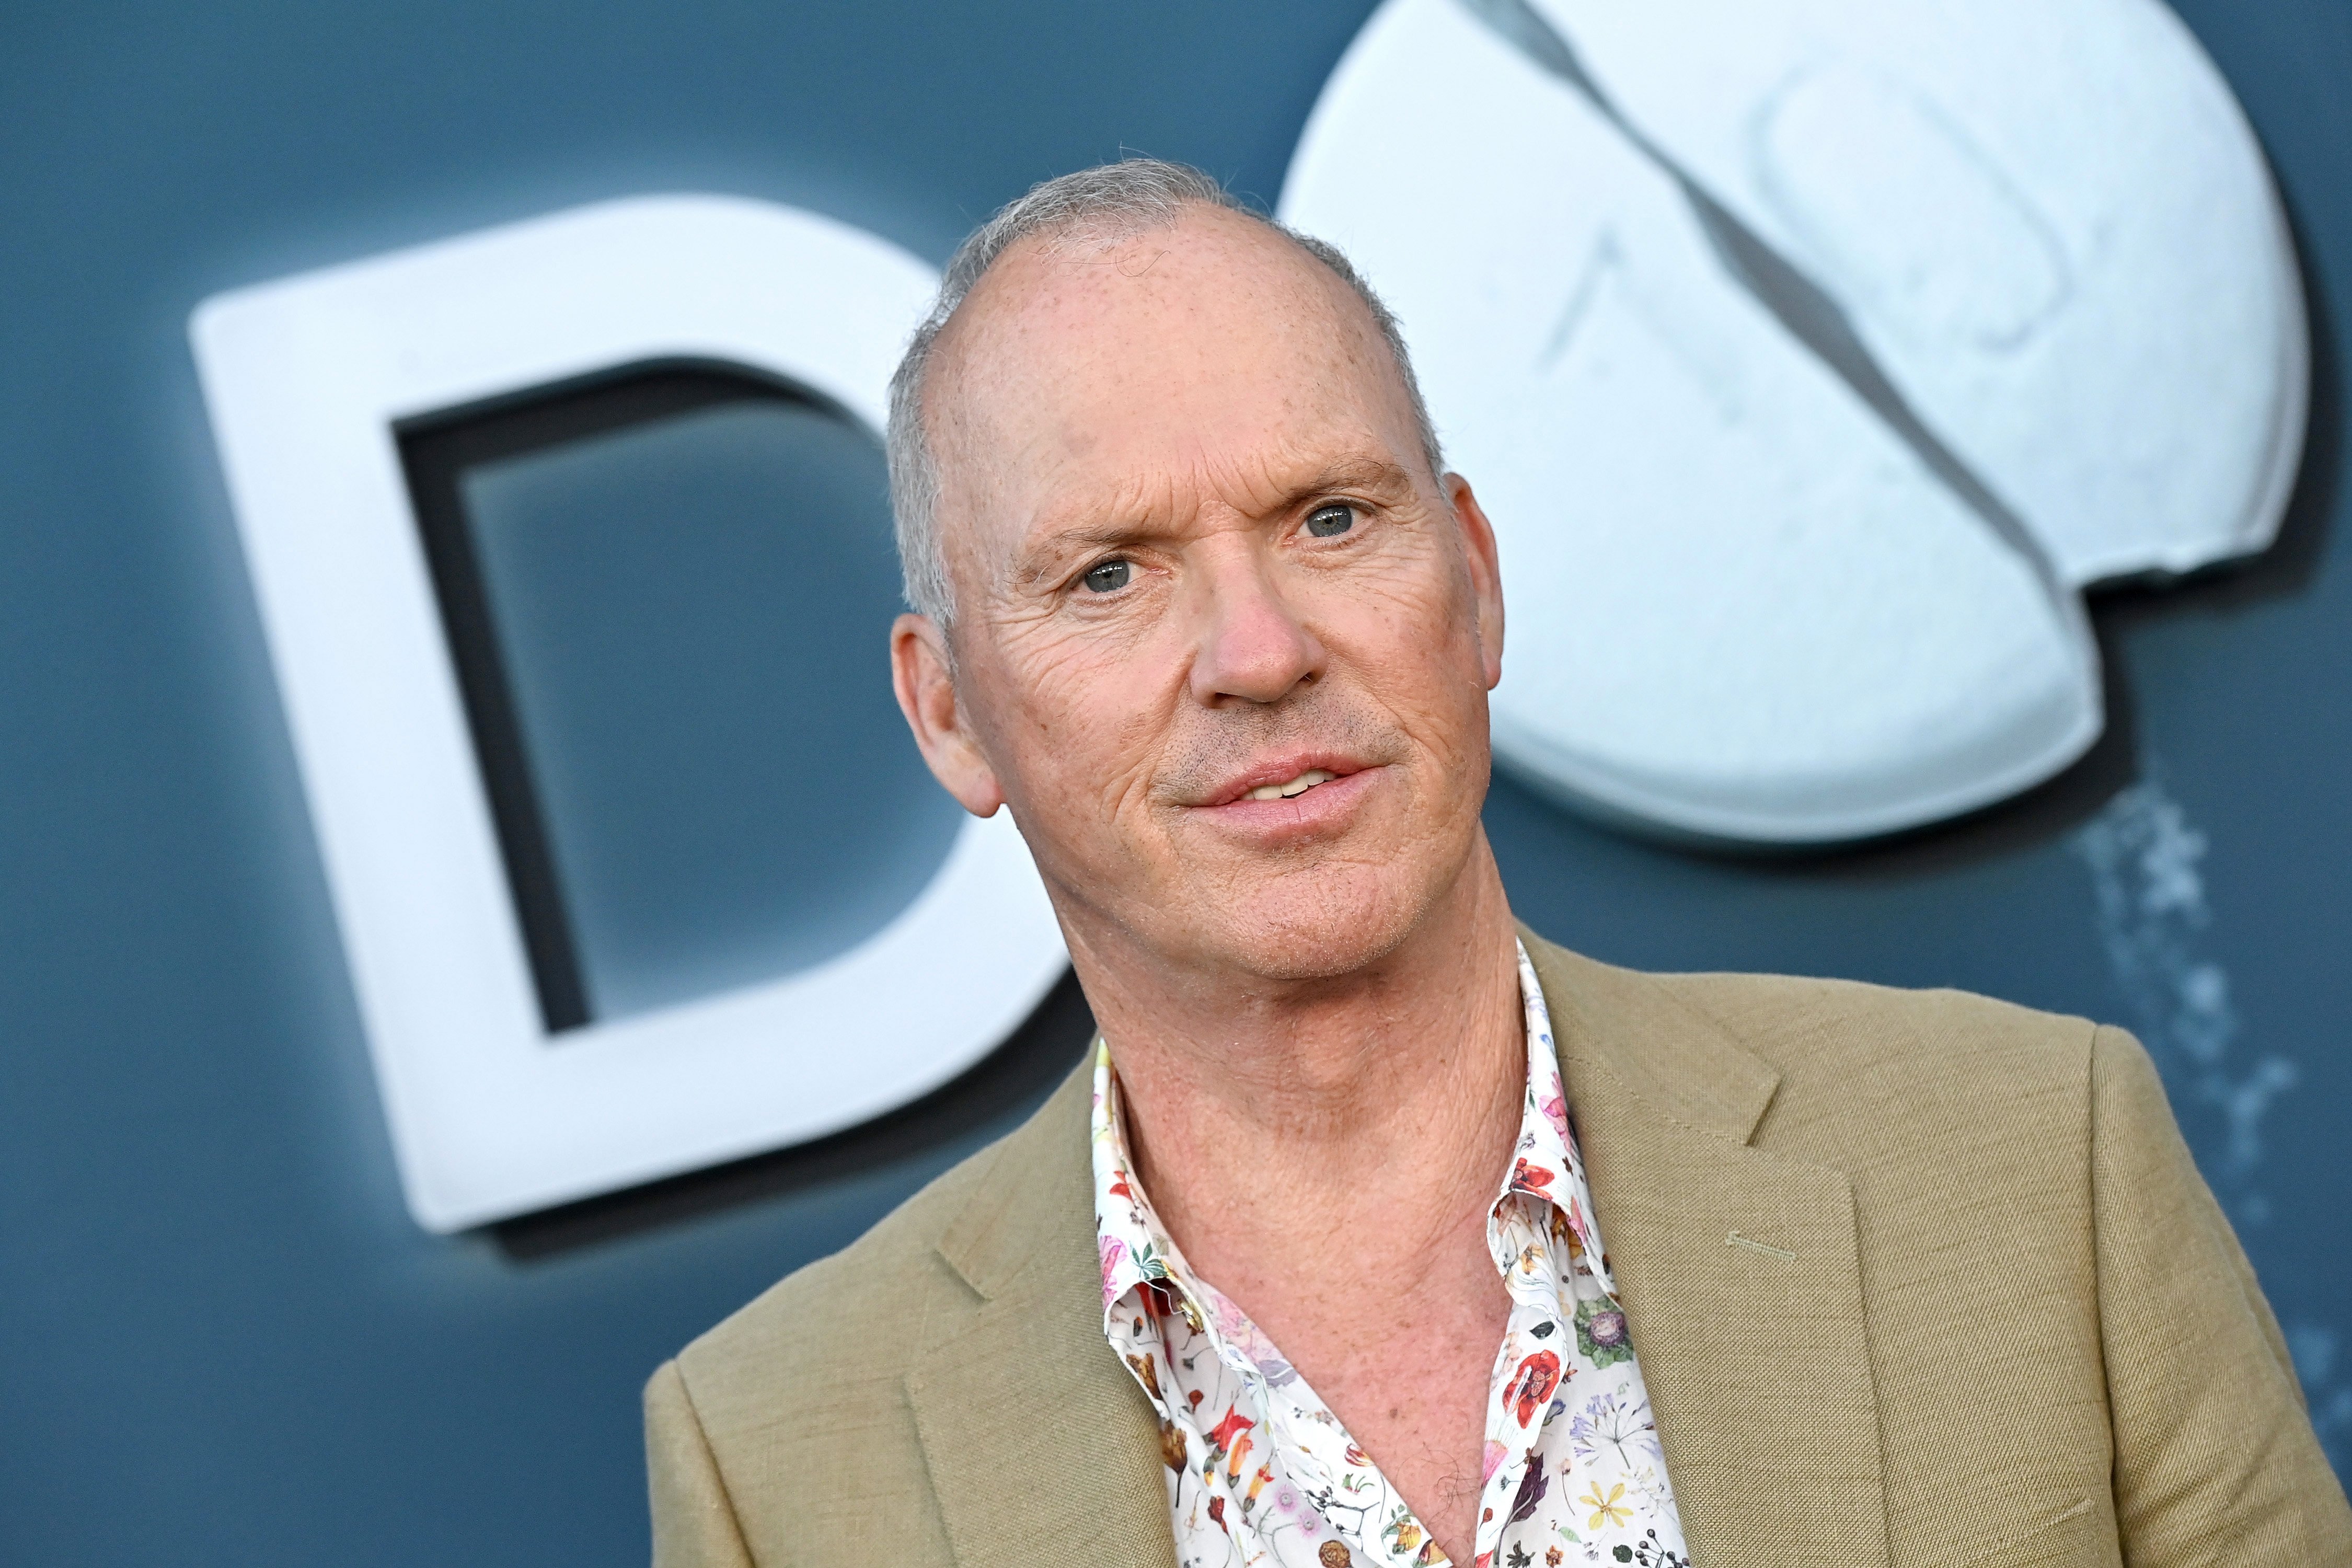 Michael Keaton at a "DOPESICK" Special Screening and Q&A Event hosted at El Capitan Theatre in Los Angeles, California, on June 14, 2022. | Source: Getty Images